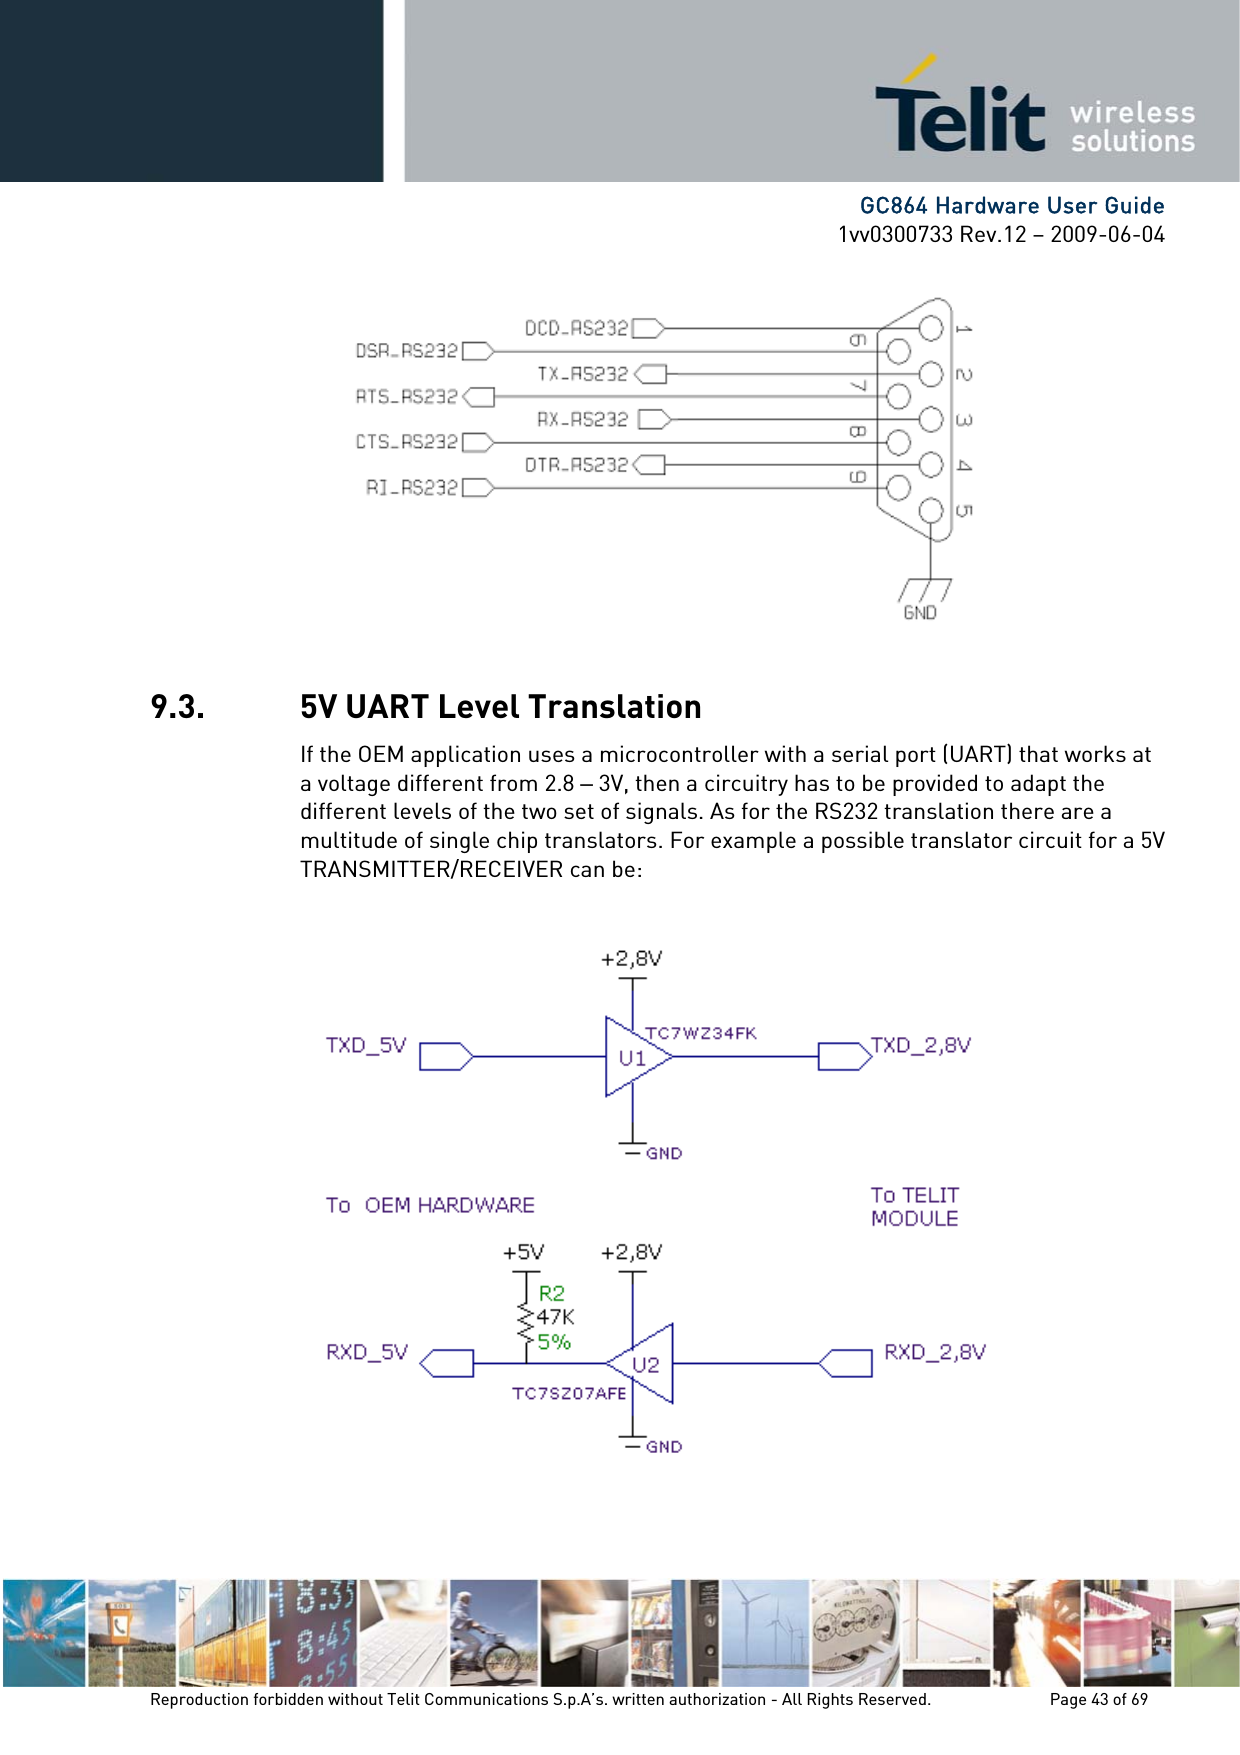      GC864 Hardware User Guide 1vv0300733 Rev.12 – 2009-06-04  9.3. 5V UART Level Translation If the OEM application uses a microcontroller with a serial port (UART) that works at a voltage different from 2.8 – 3V, then a circuitry has to be provided to adapt the different levels of the two set of signals. As for the RS232 translation there are a multitude of single chip translators. For example a possible translator circuit for a 5V TRANSMITTER/RECEIVER can be:    Reproduction forbidden without Telit Communications S.p.A’s. written authorization - All Rights Reserved.    Page 43 of 69  